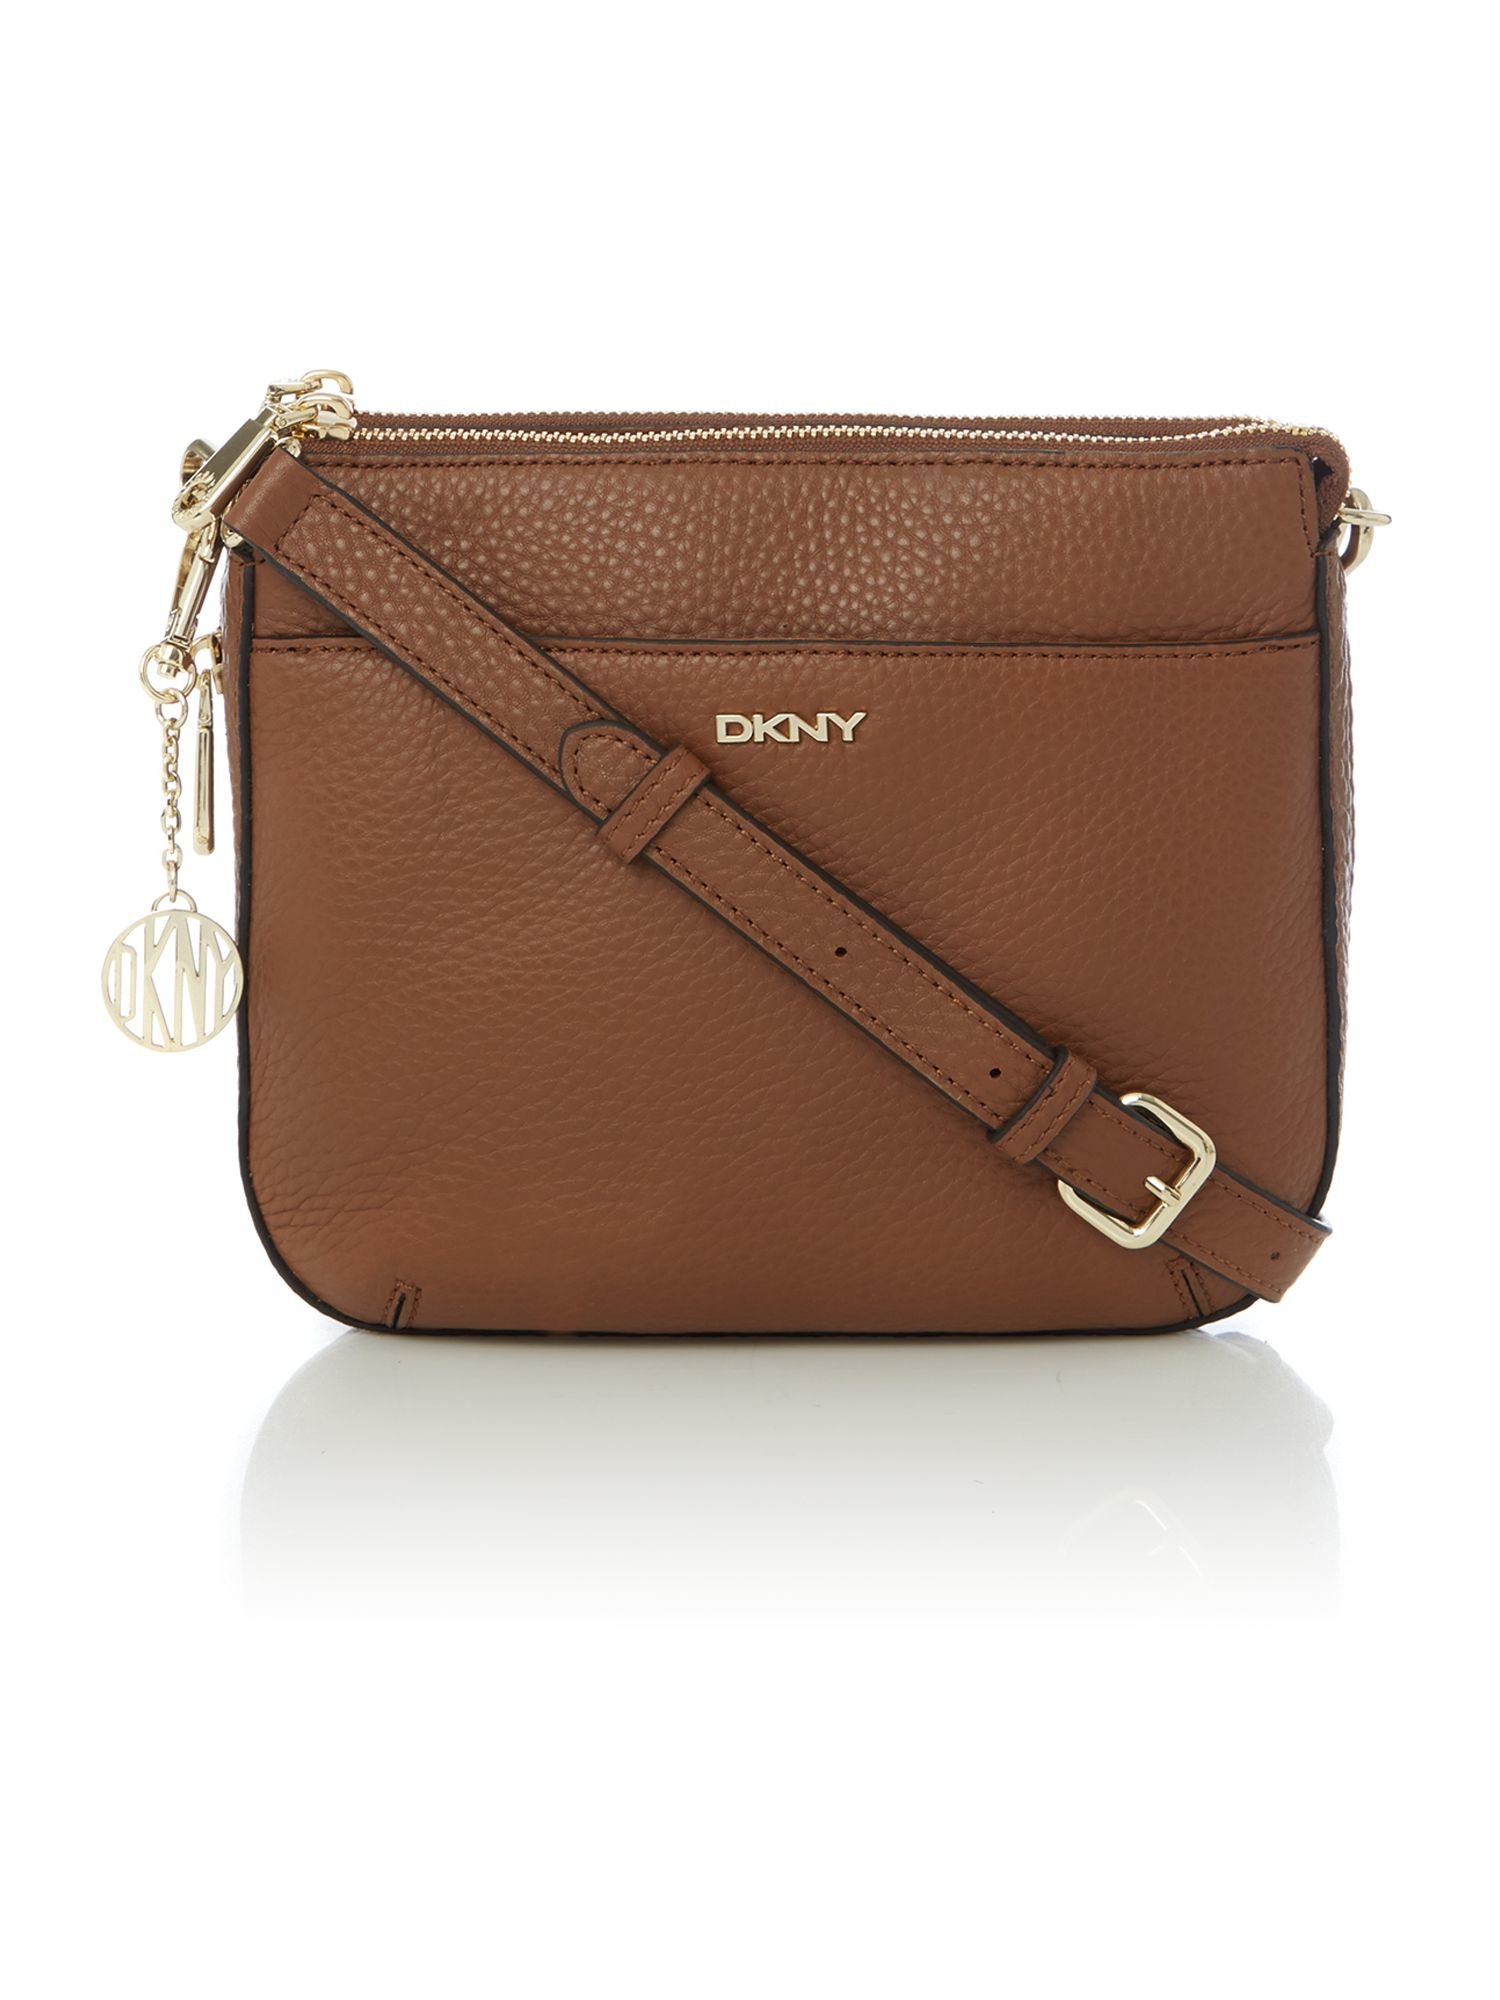 Dkny Tribeca Tan Double Zip Rounded Cross Body Bag in Brown | Lyst